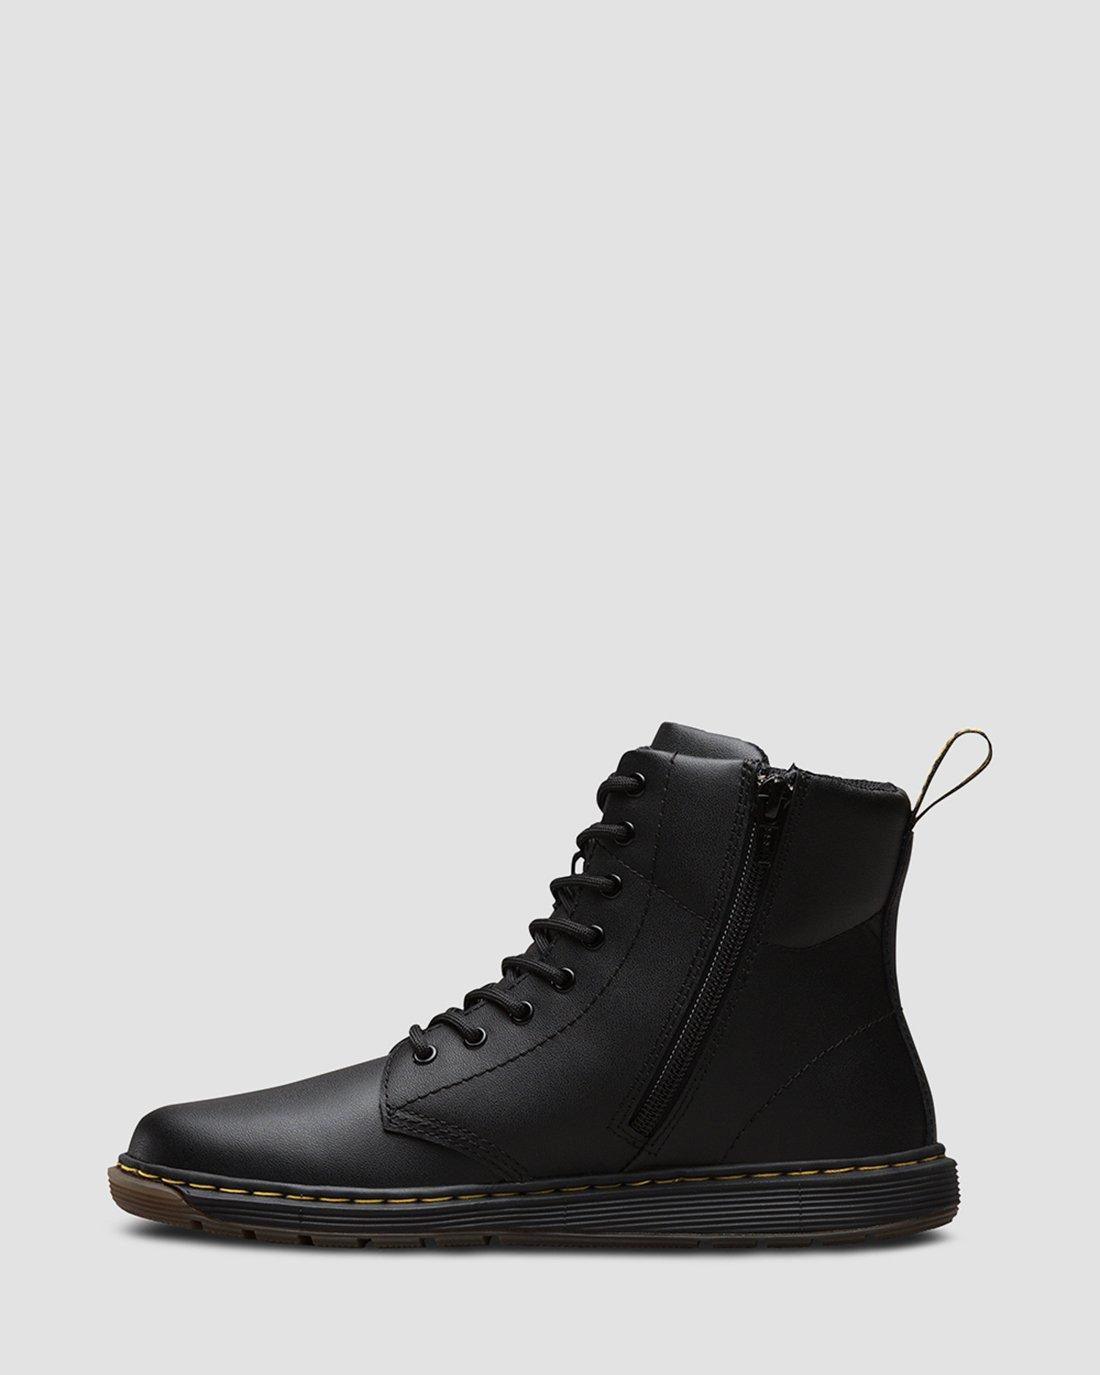 YOUTH MALKY LEATHER | Dr. Martens